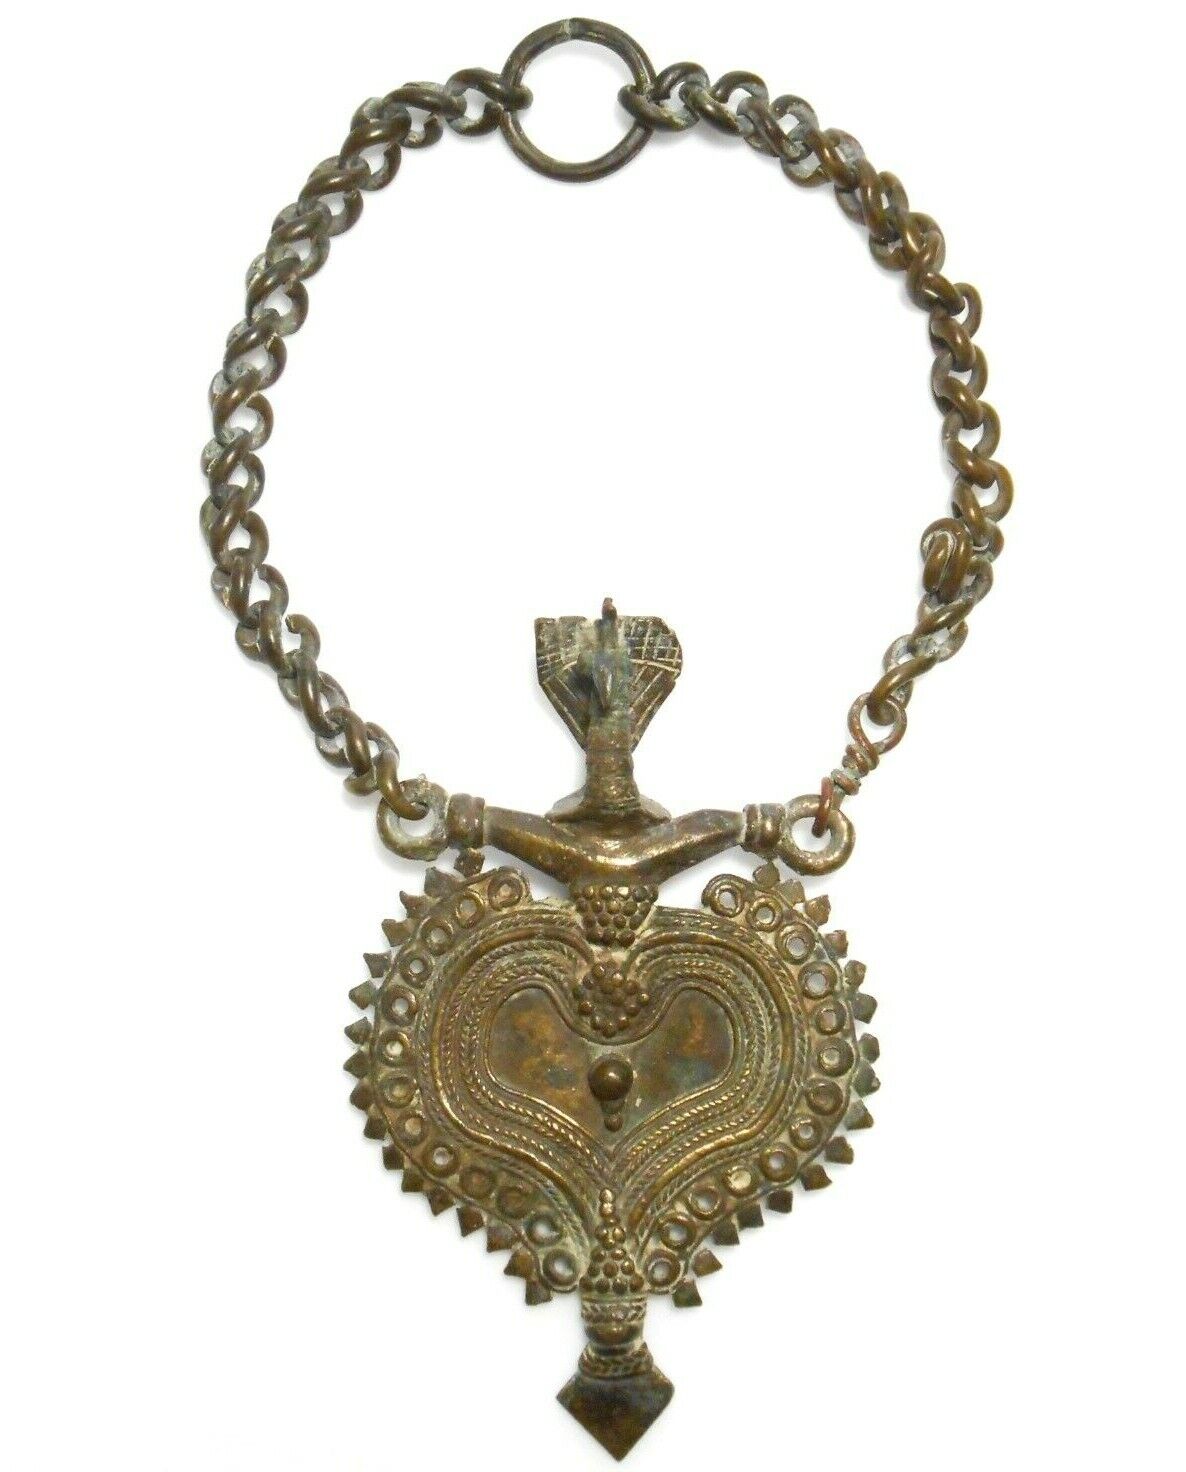 LATE 19TH-EARLY 20TH C INDIAN LG BRONZE HEART-SHAPED PEACOCK PENDANT W/CHAIN